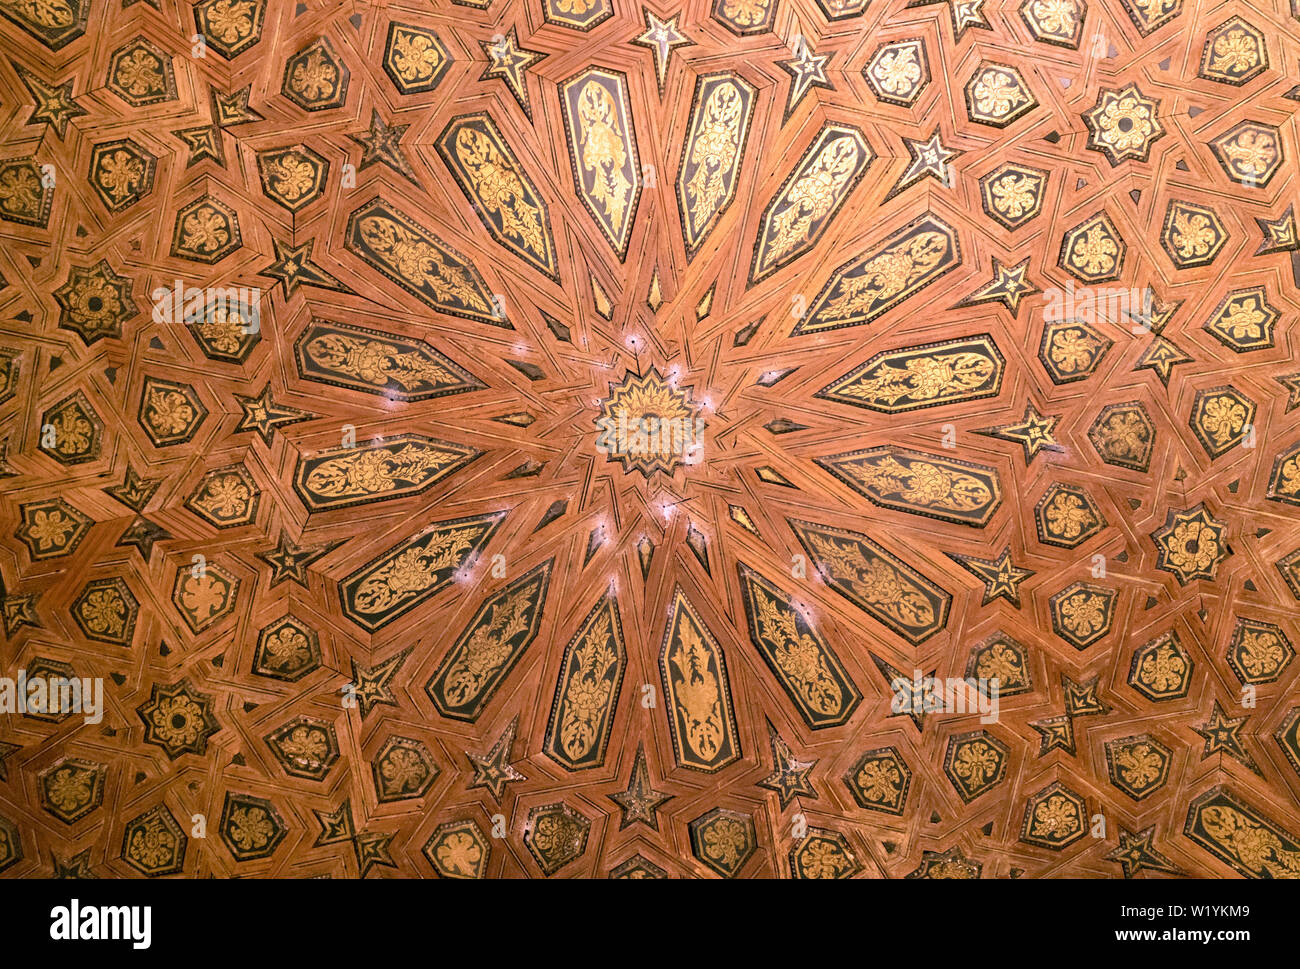 Inlaid wooden ceiling with Moorish designs, the Alhambra, Granada, Granada Province, Andalusia, southern Spain.  The Alhambra, Generalife and Albayzin Stock Photo